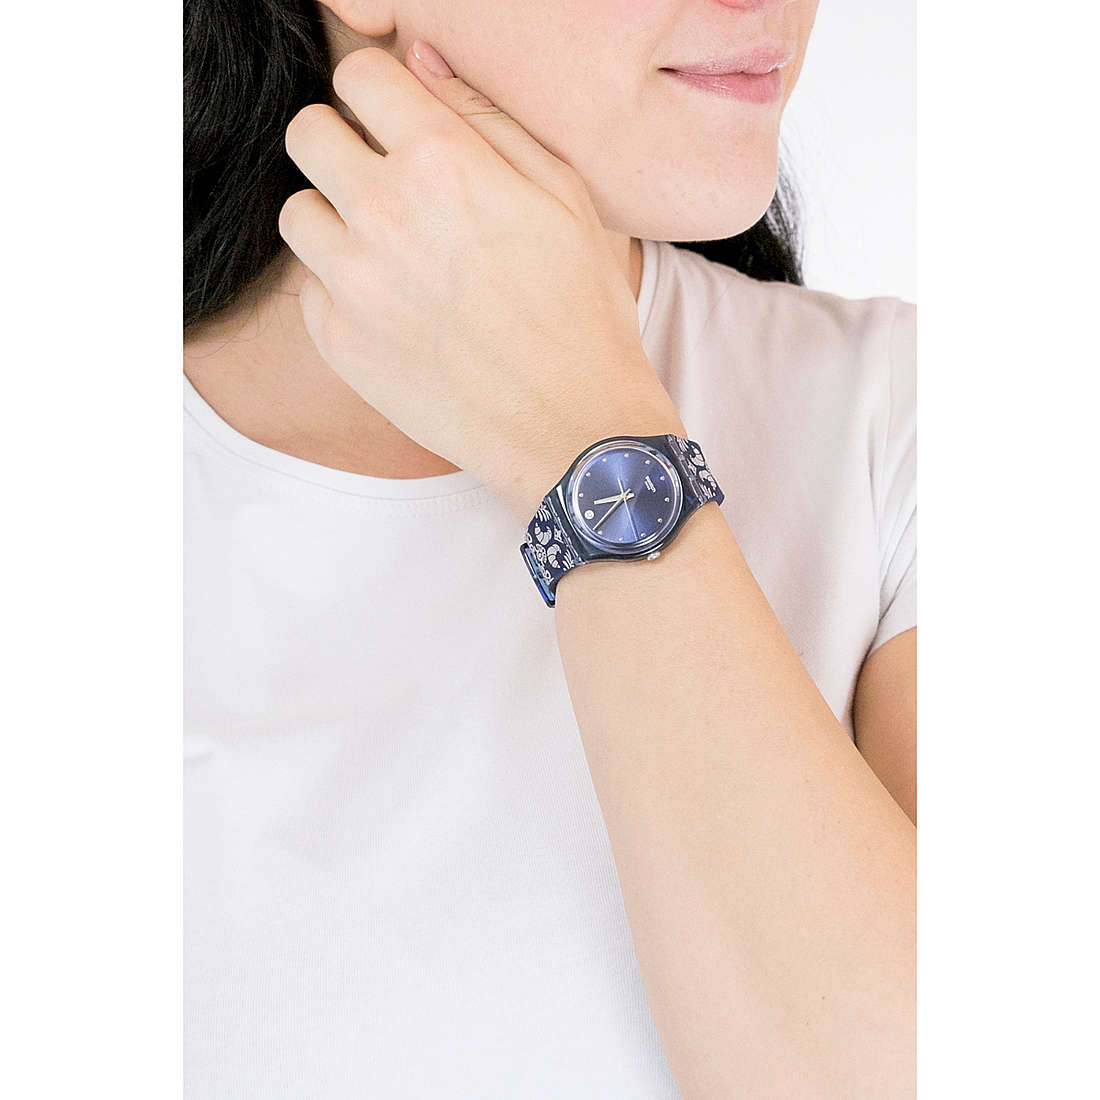 Swatch solo tempo Knightliness donna GN413 indosso